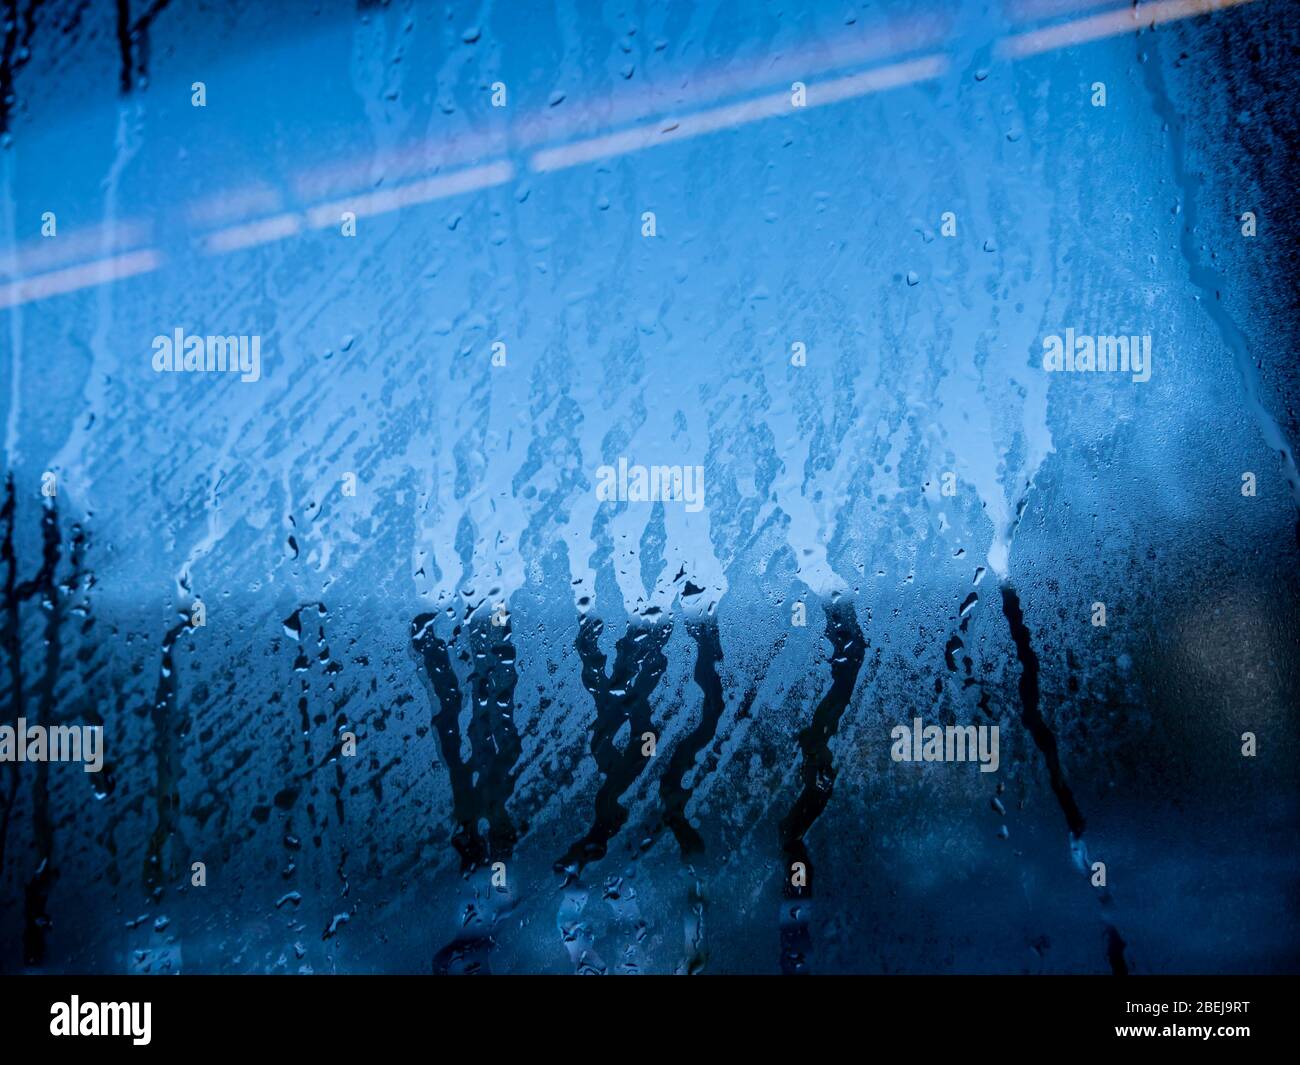 Condensation water drop on the blue glass window. Rain. Abstract background texture. Stock Photo